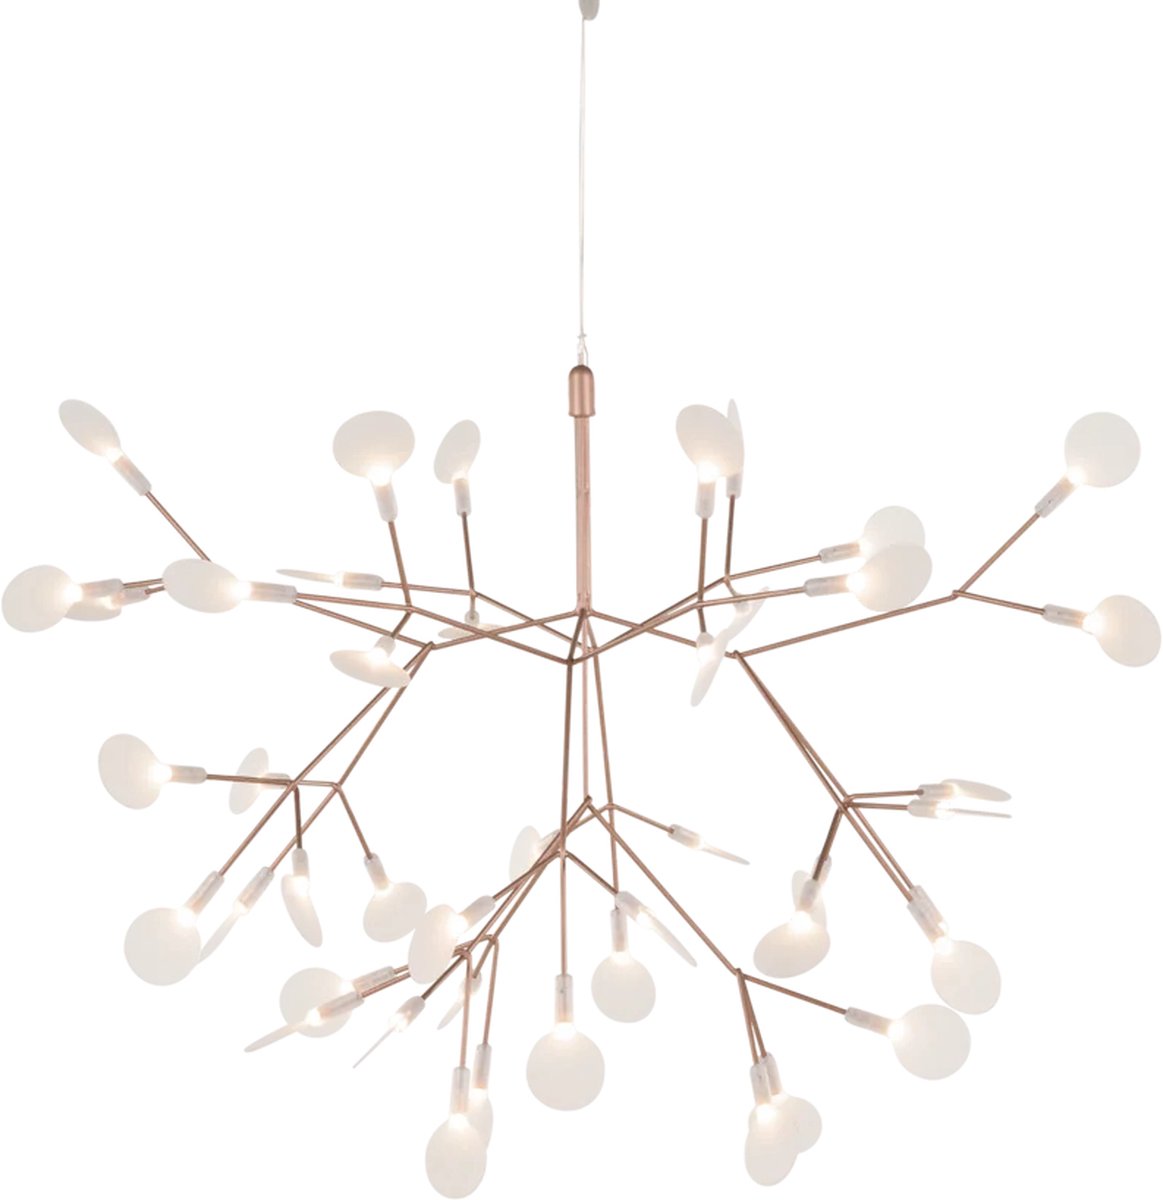 Moooi - Heracleum III Suspended - Small - Copper